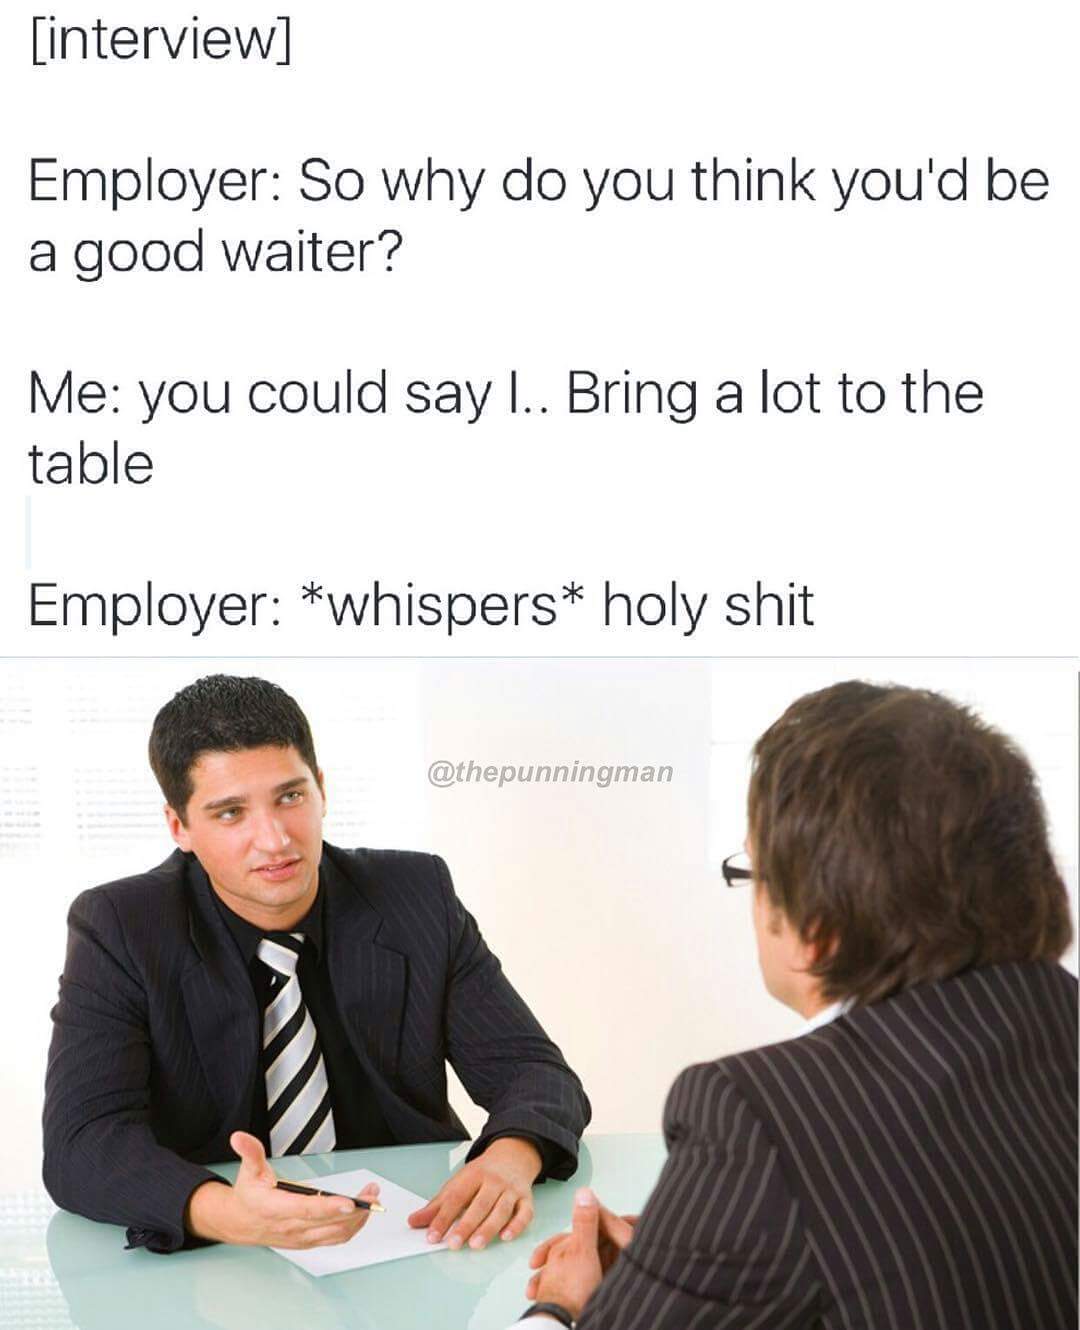 Dank meme about how much a good waiter can bring to the table.